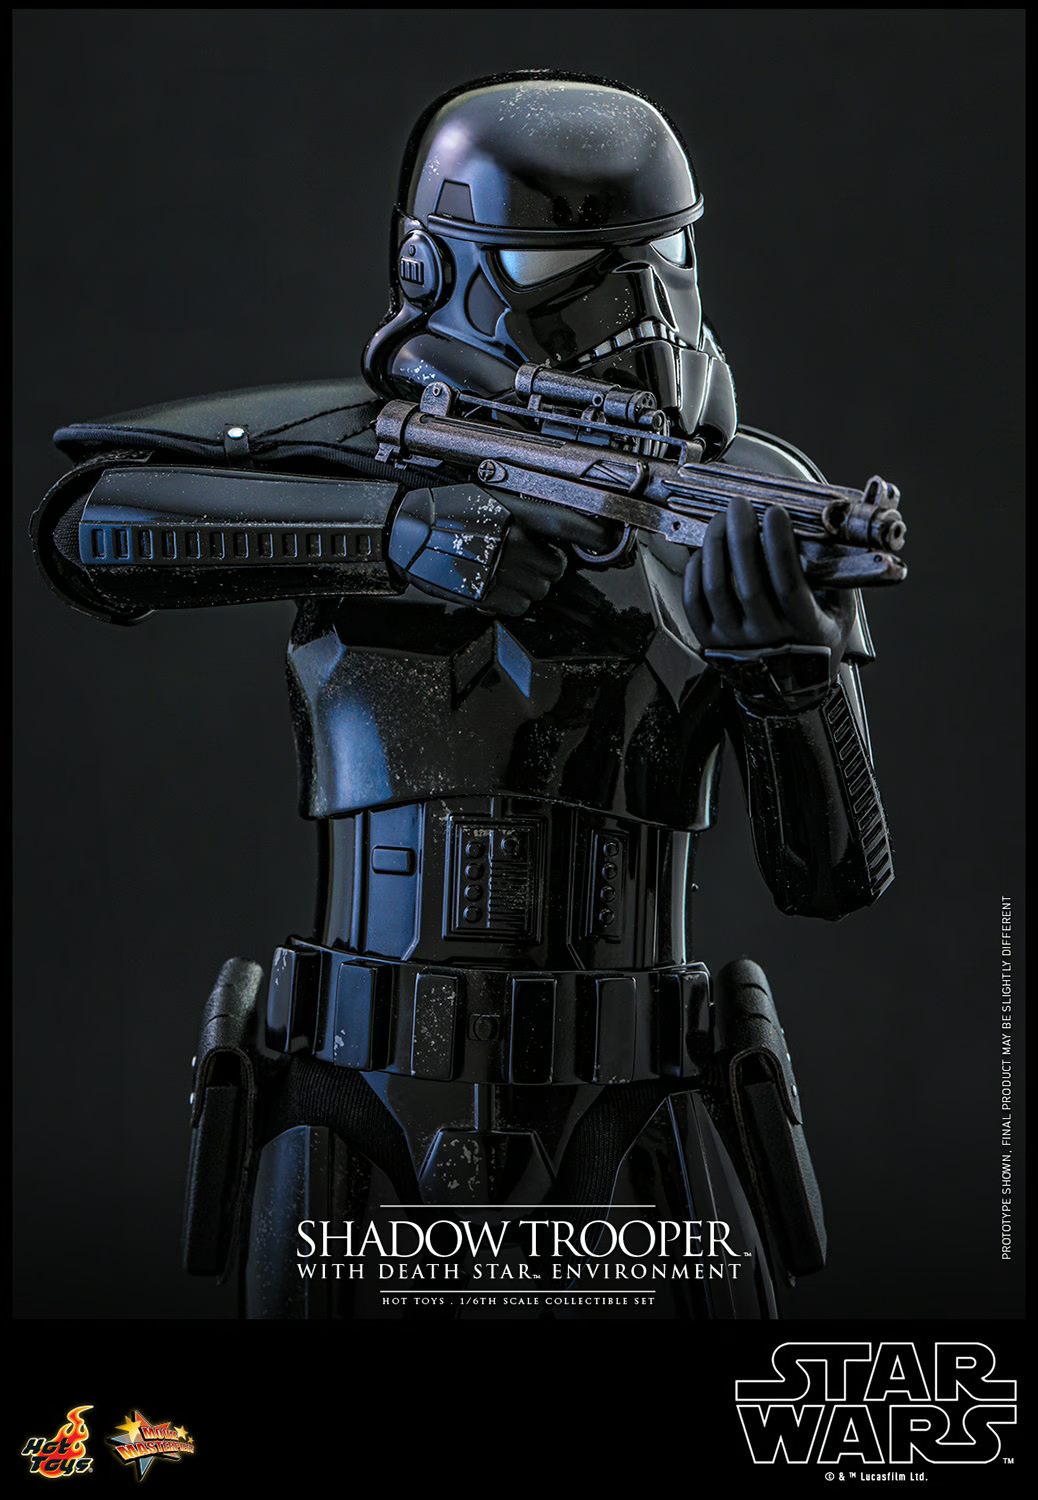 Star Wars: Shadow Trooper with Death Star Environment: Sixth Scale Figure Hot Toys